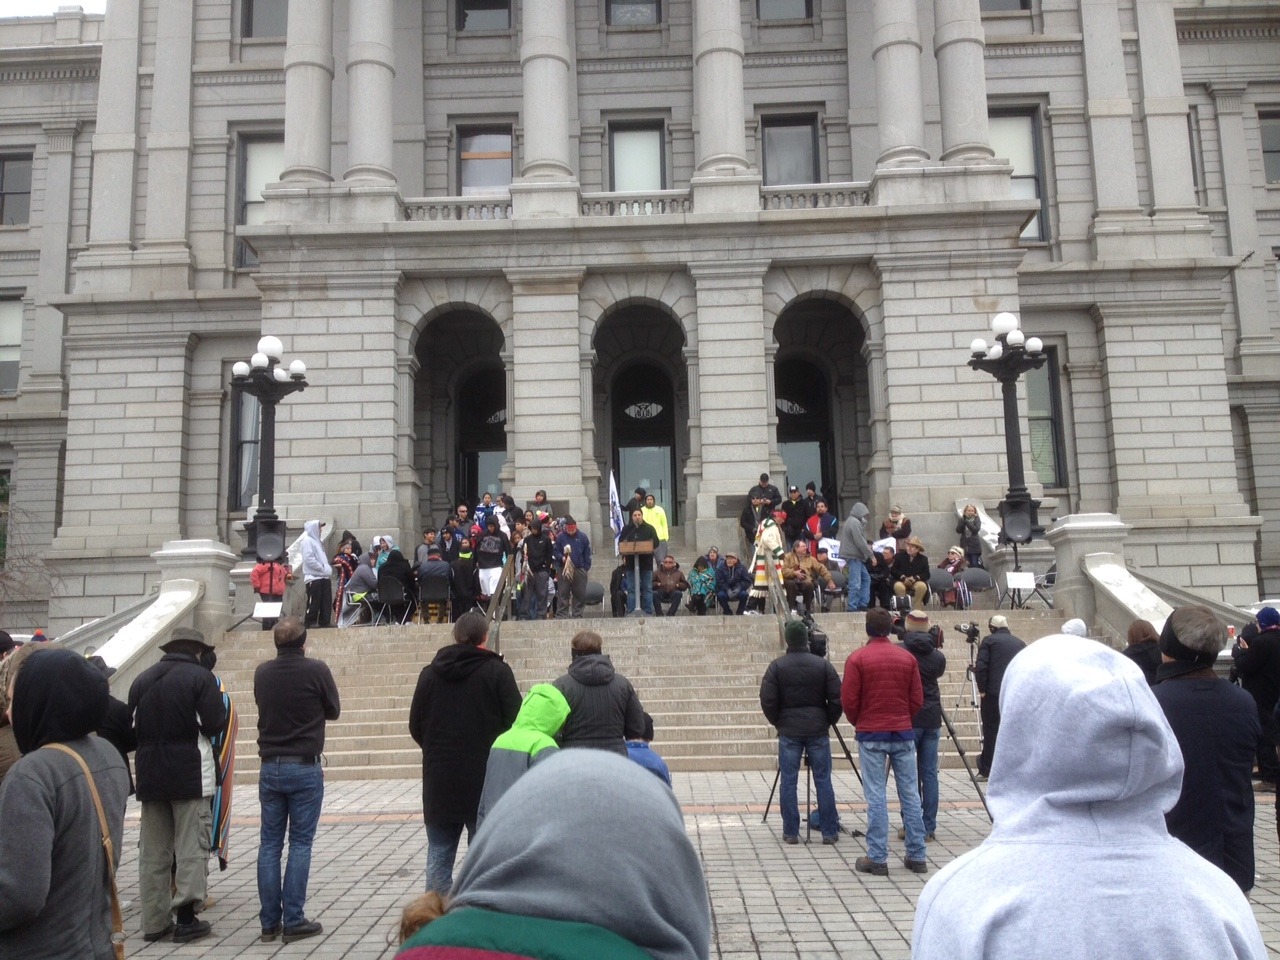 Cheyenne and Arapaho tribal leaders and memorial runners joined state representatives on the steps of the state capitol on Nov. 29 to remember the Sand Creek Massacre. (Marrton Dormish)